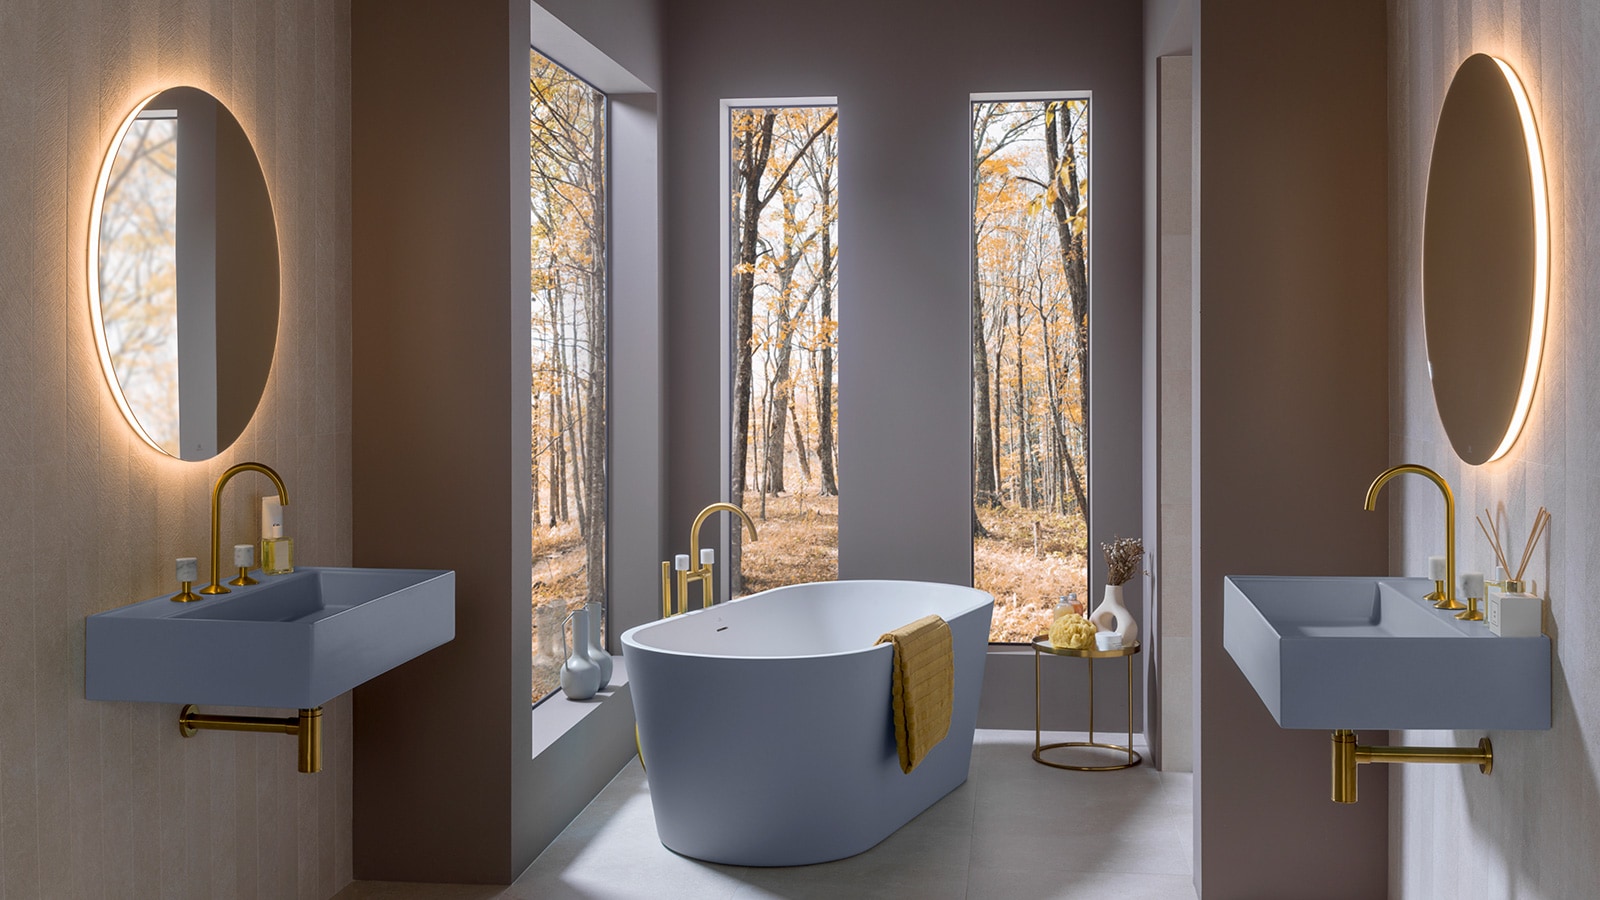 Noken offers new bathroom experiences at Cersaie 2022